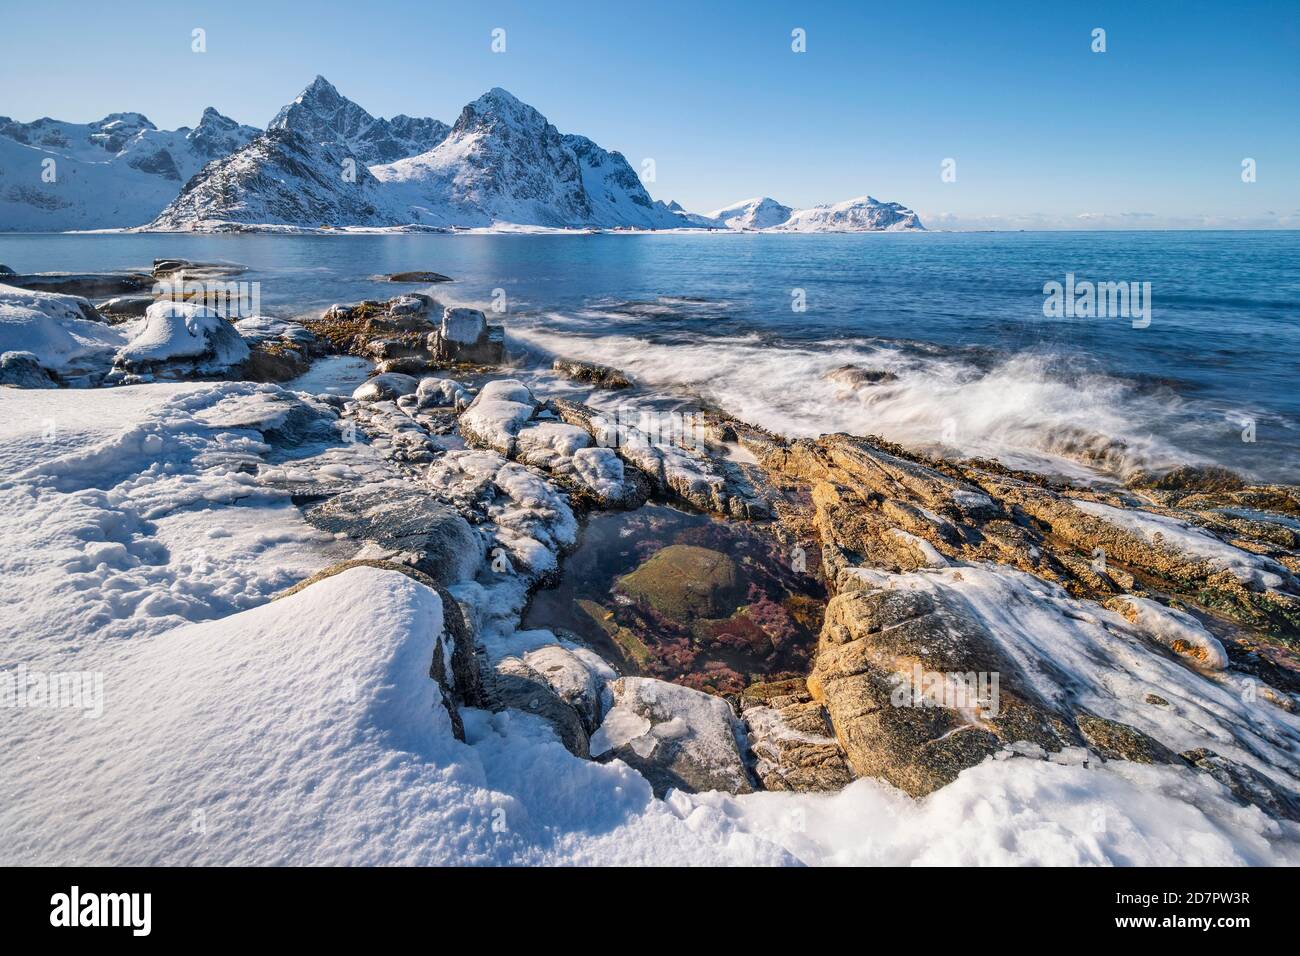 Snow-covered rocky beach with tidal pools, coast with blue sea, behind winter mountains, Nordland, Lofoten, Norway Stock Photo